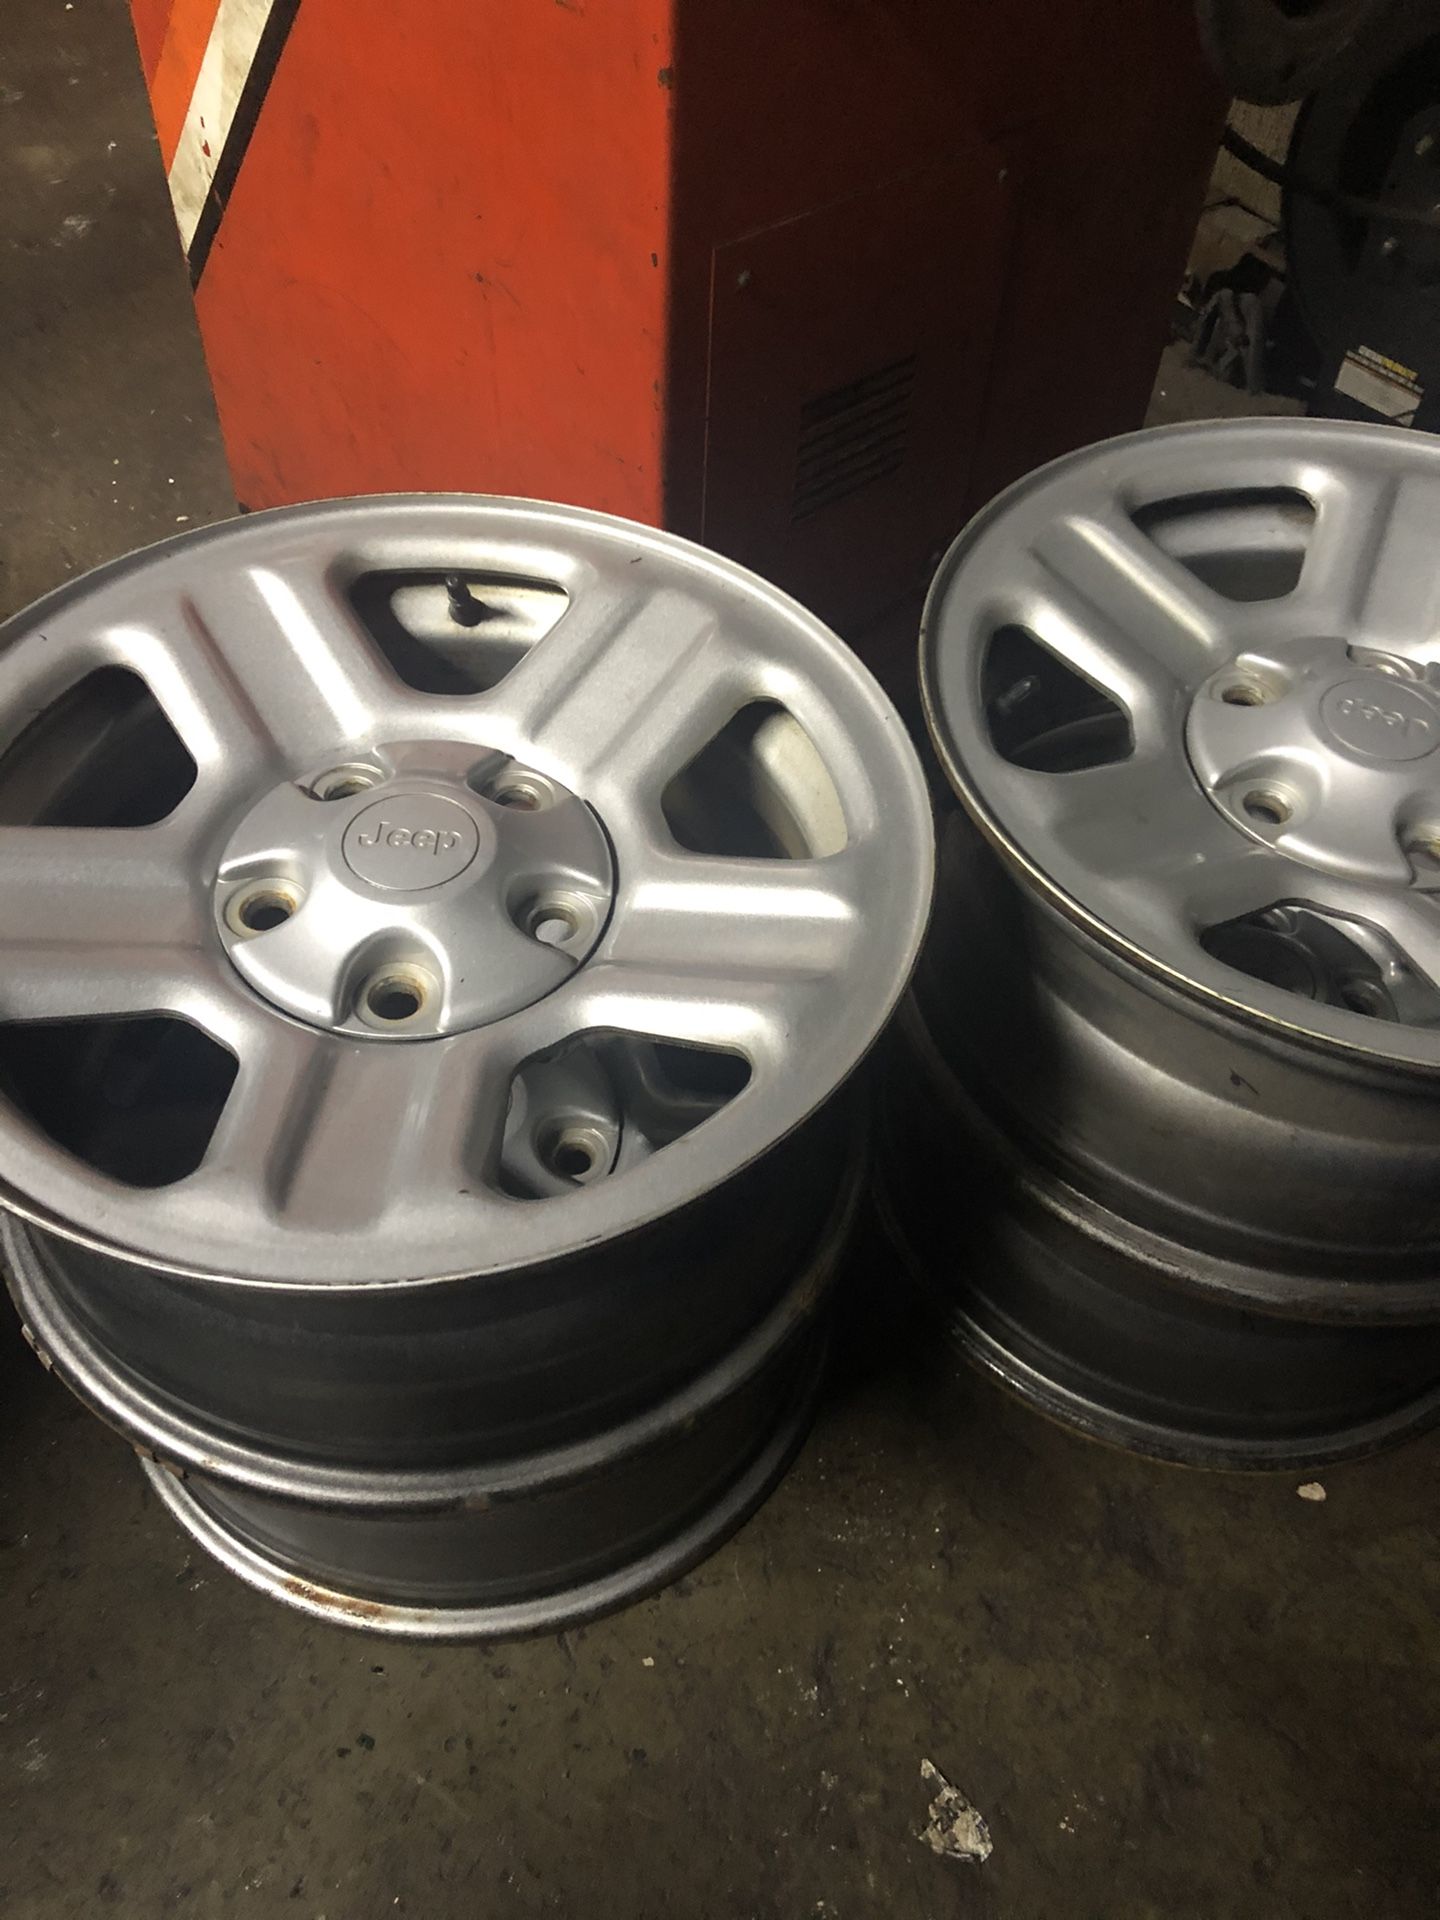 Rims for sale Any types of Jeep R16 